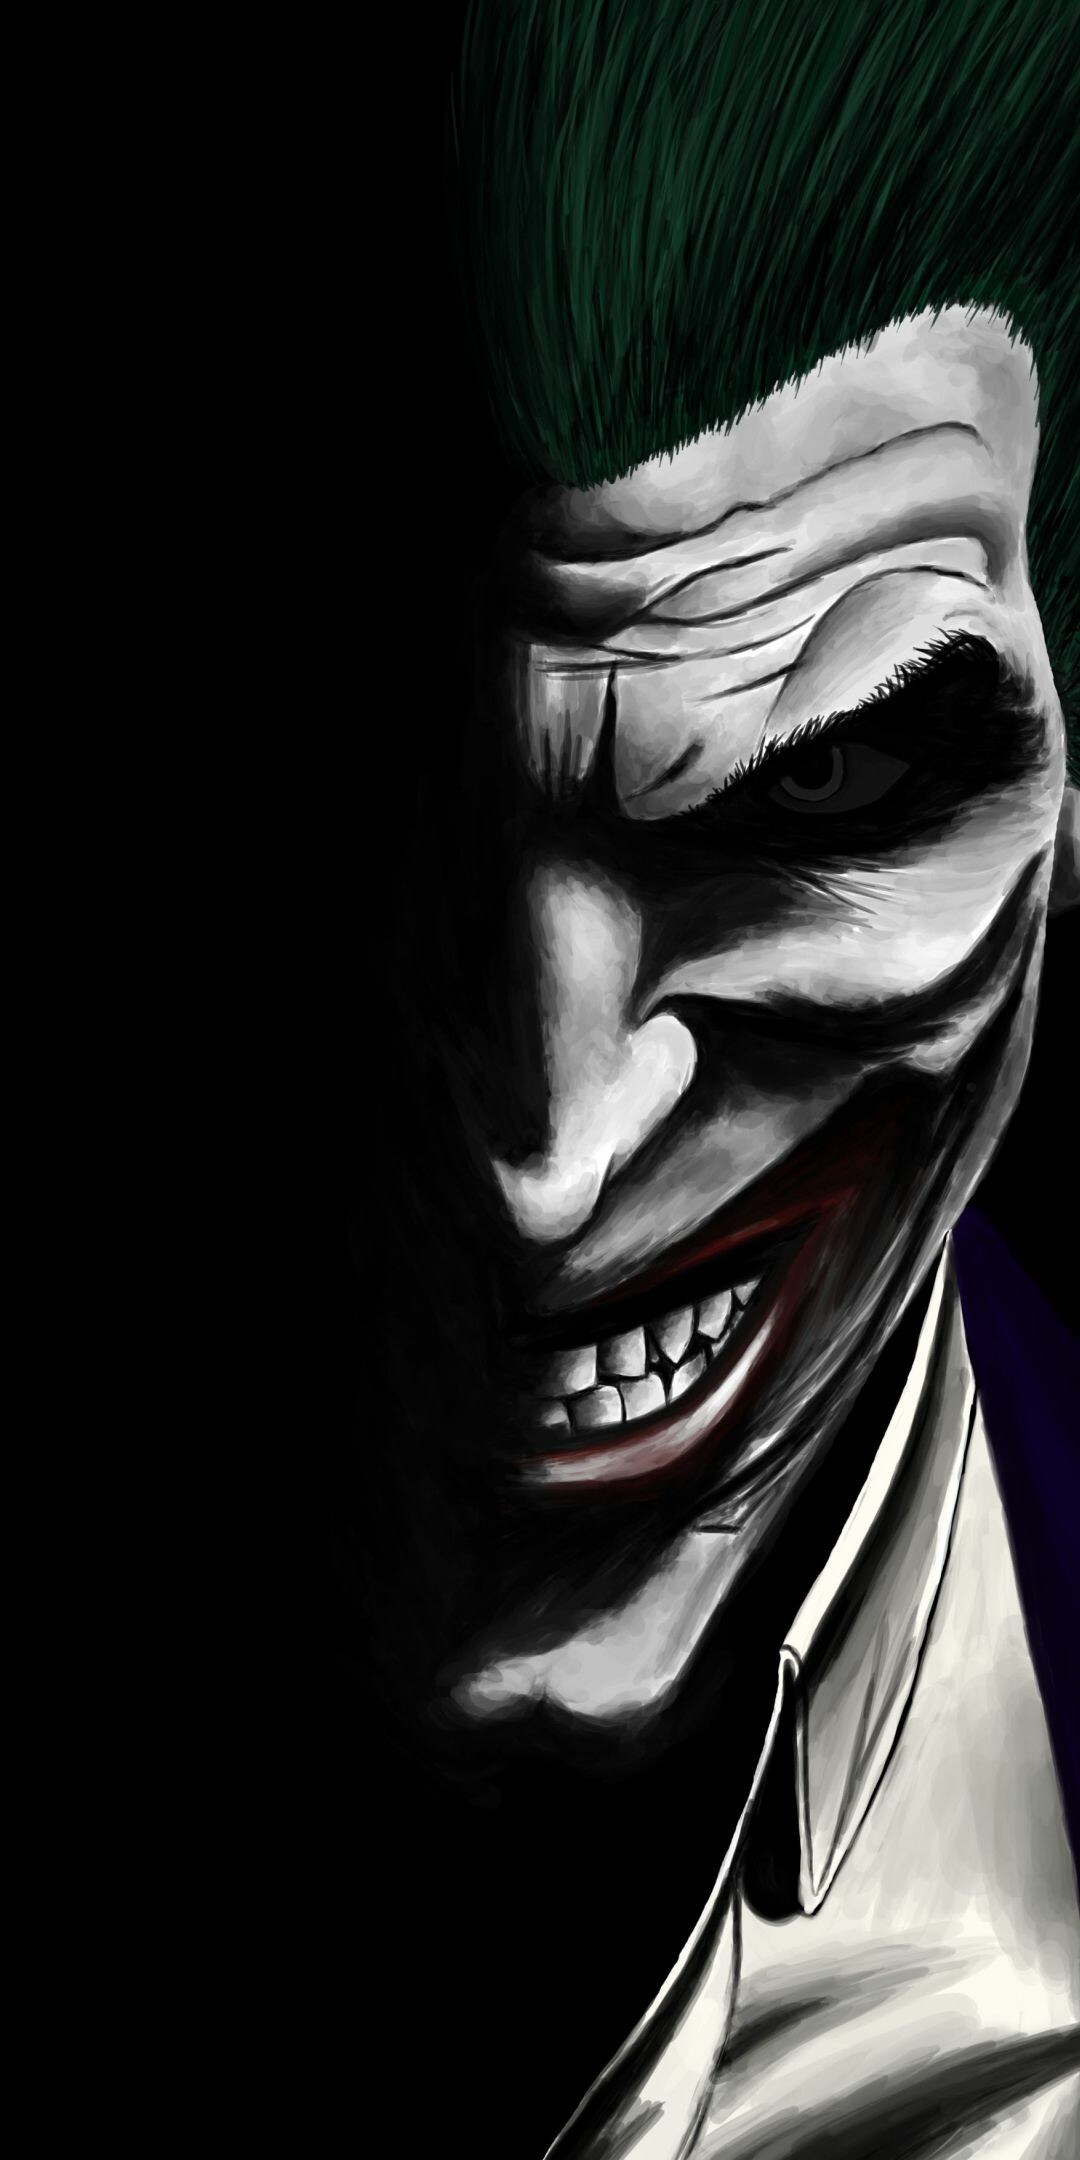 DC Villain: Joker, One of the most iconic characters in popular culture. 1080x2160 HD Wallpaper.